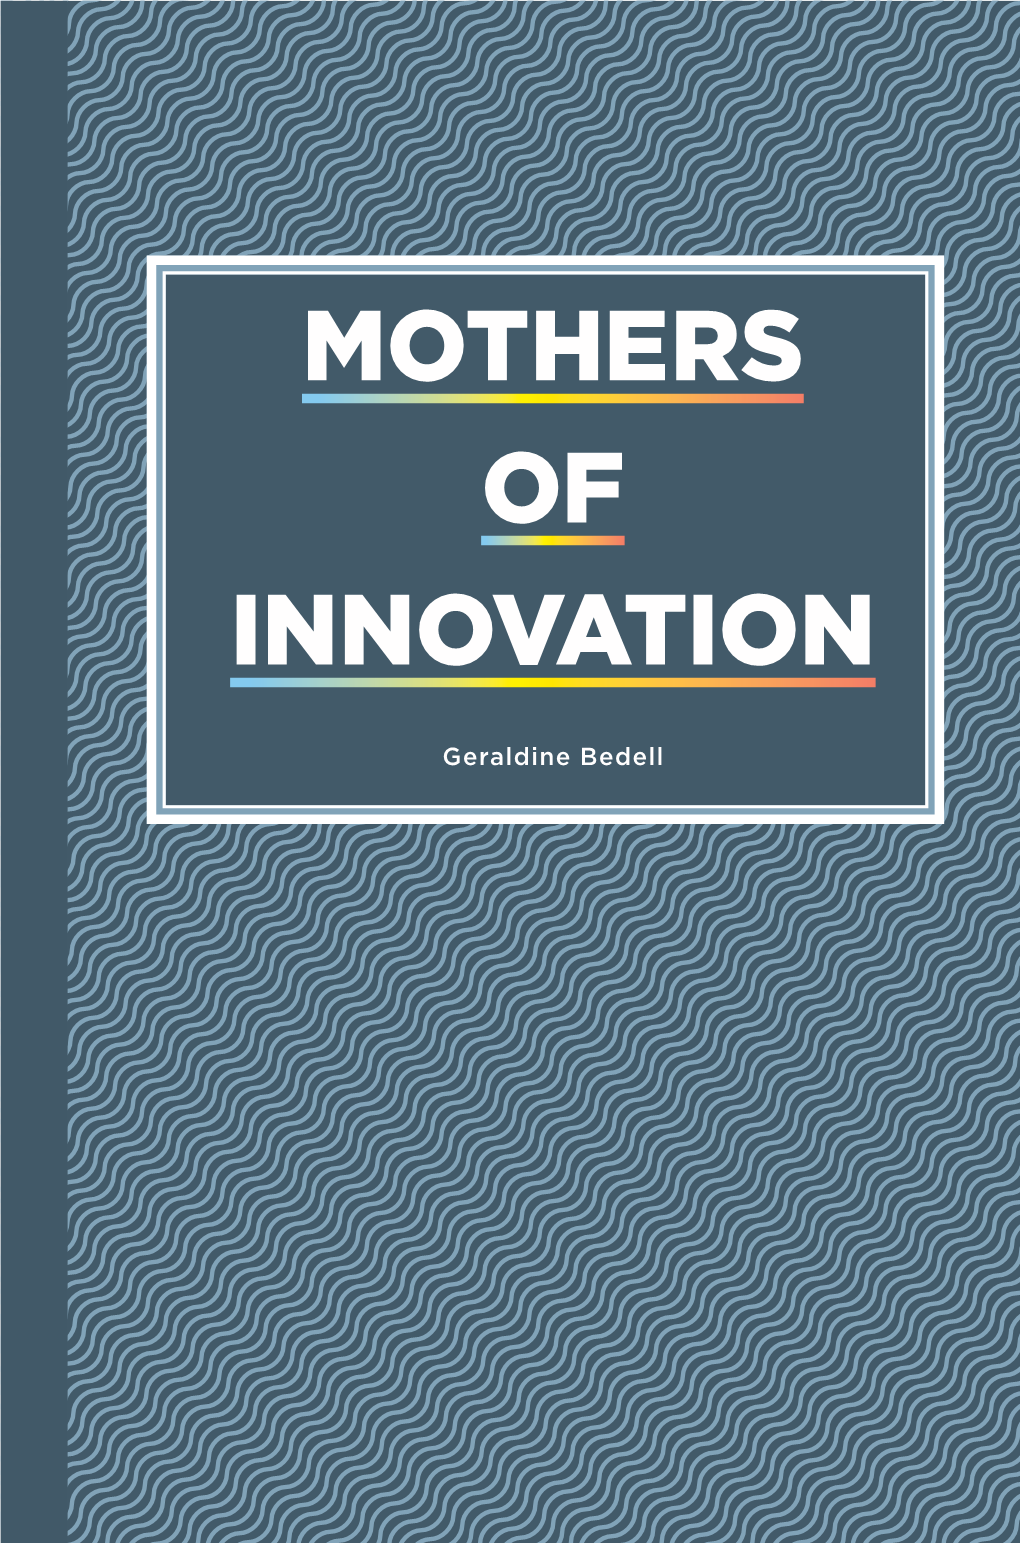 Mothers of Innovation